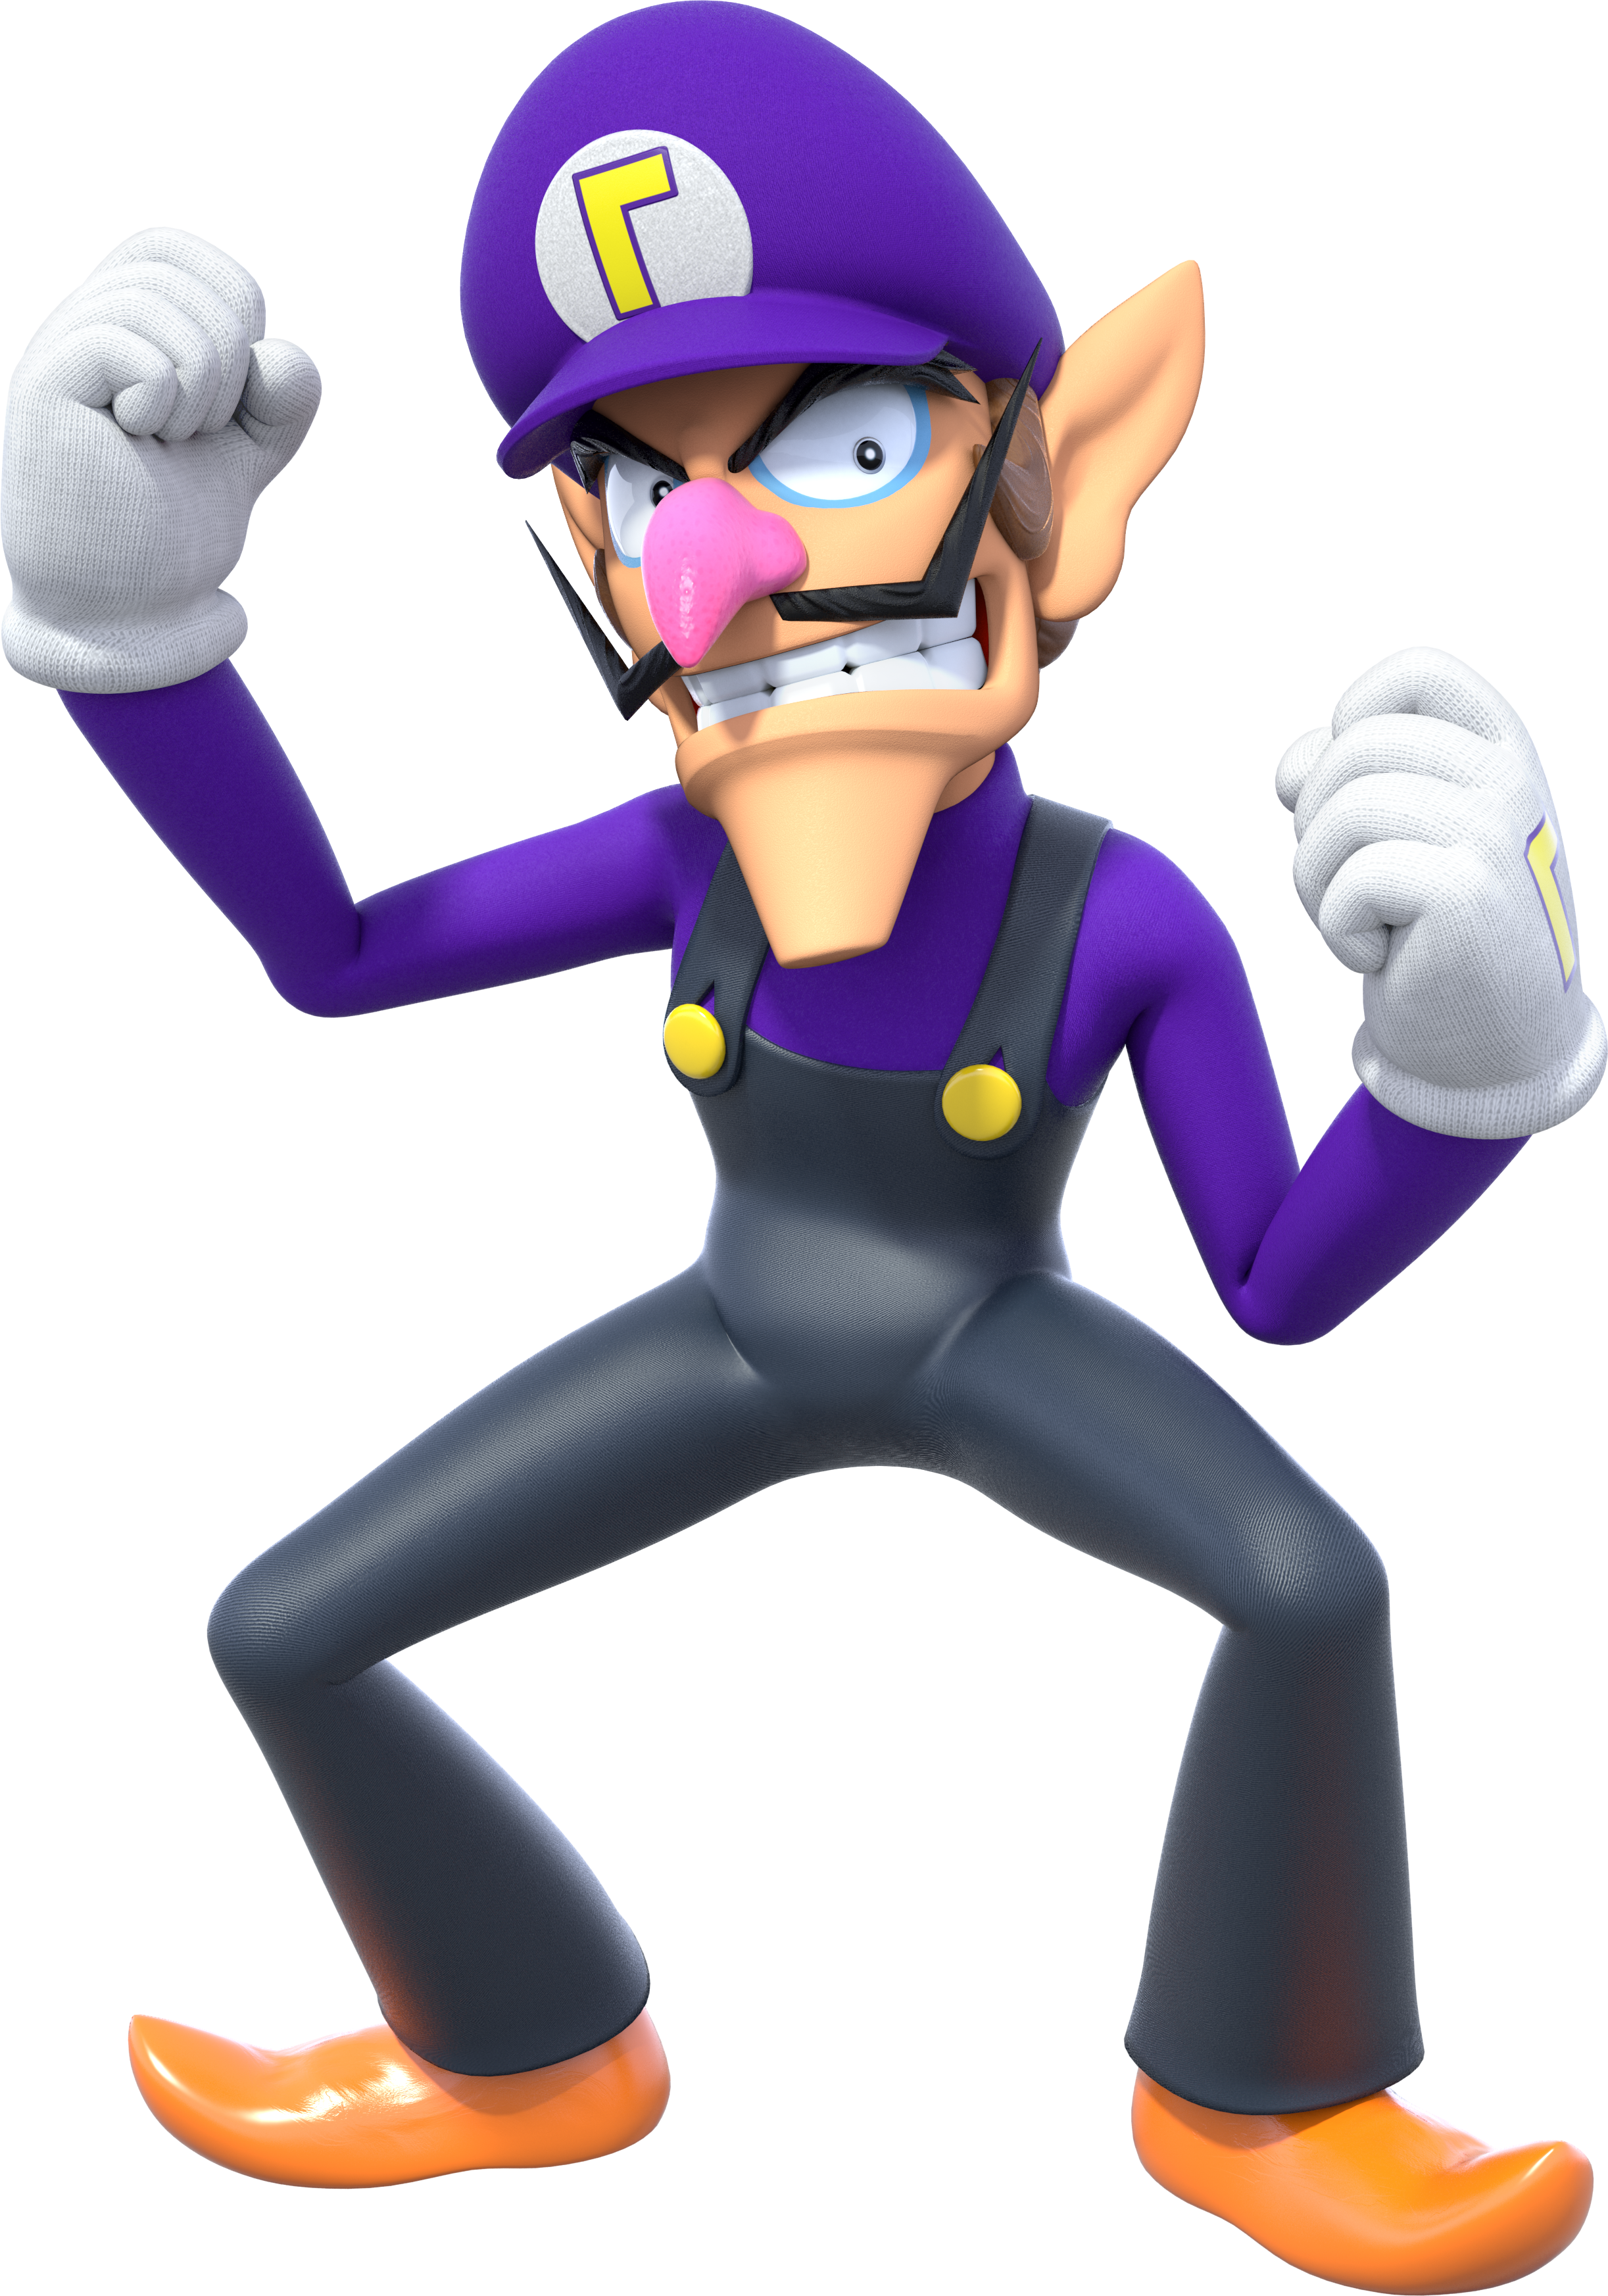 https://www.mariowiki.com/images/2/27/SuperMarioParty_Waluigi.png